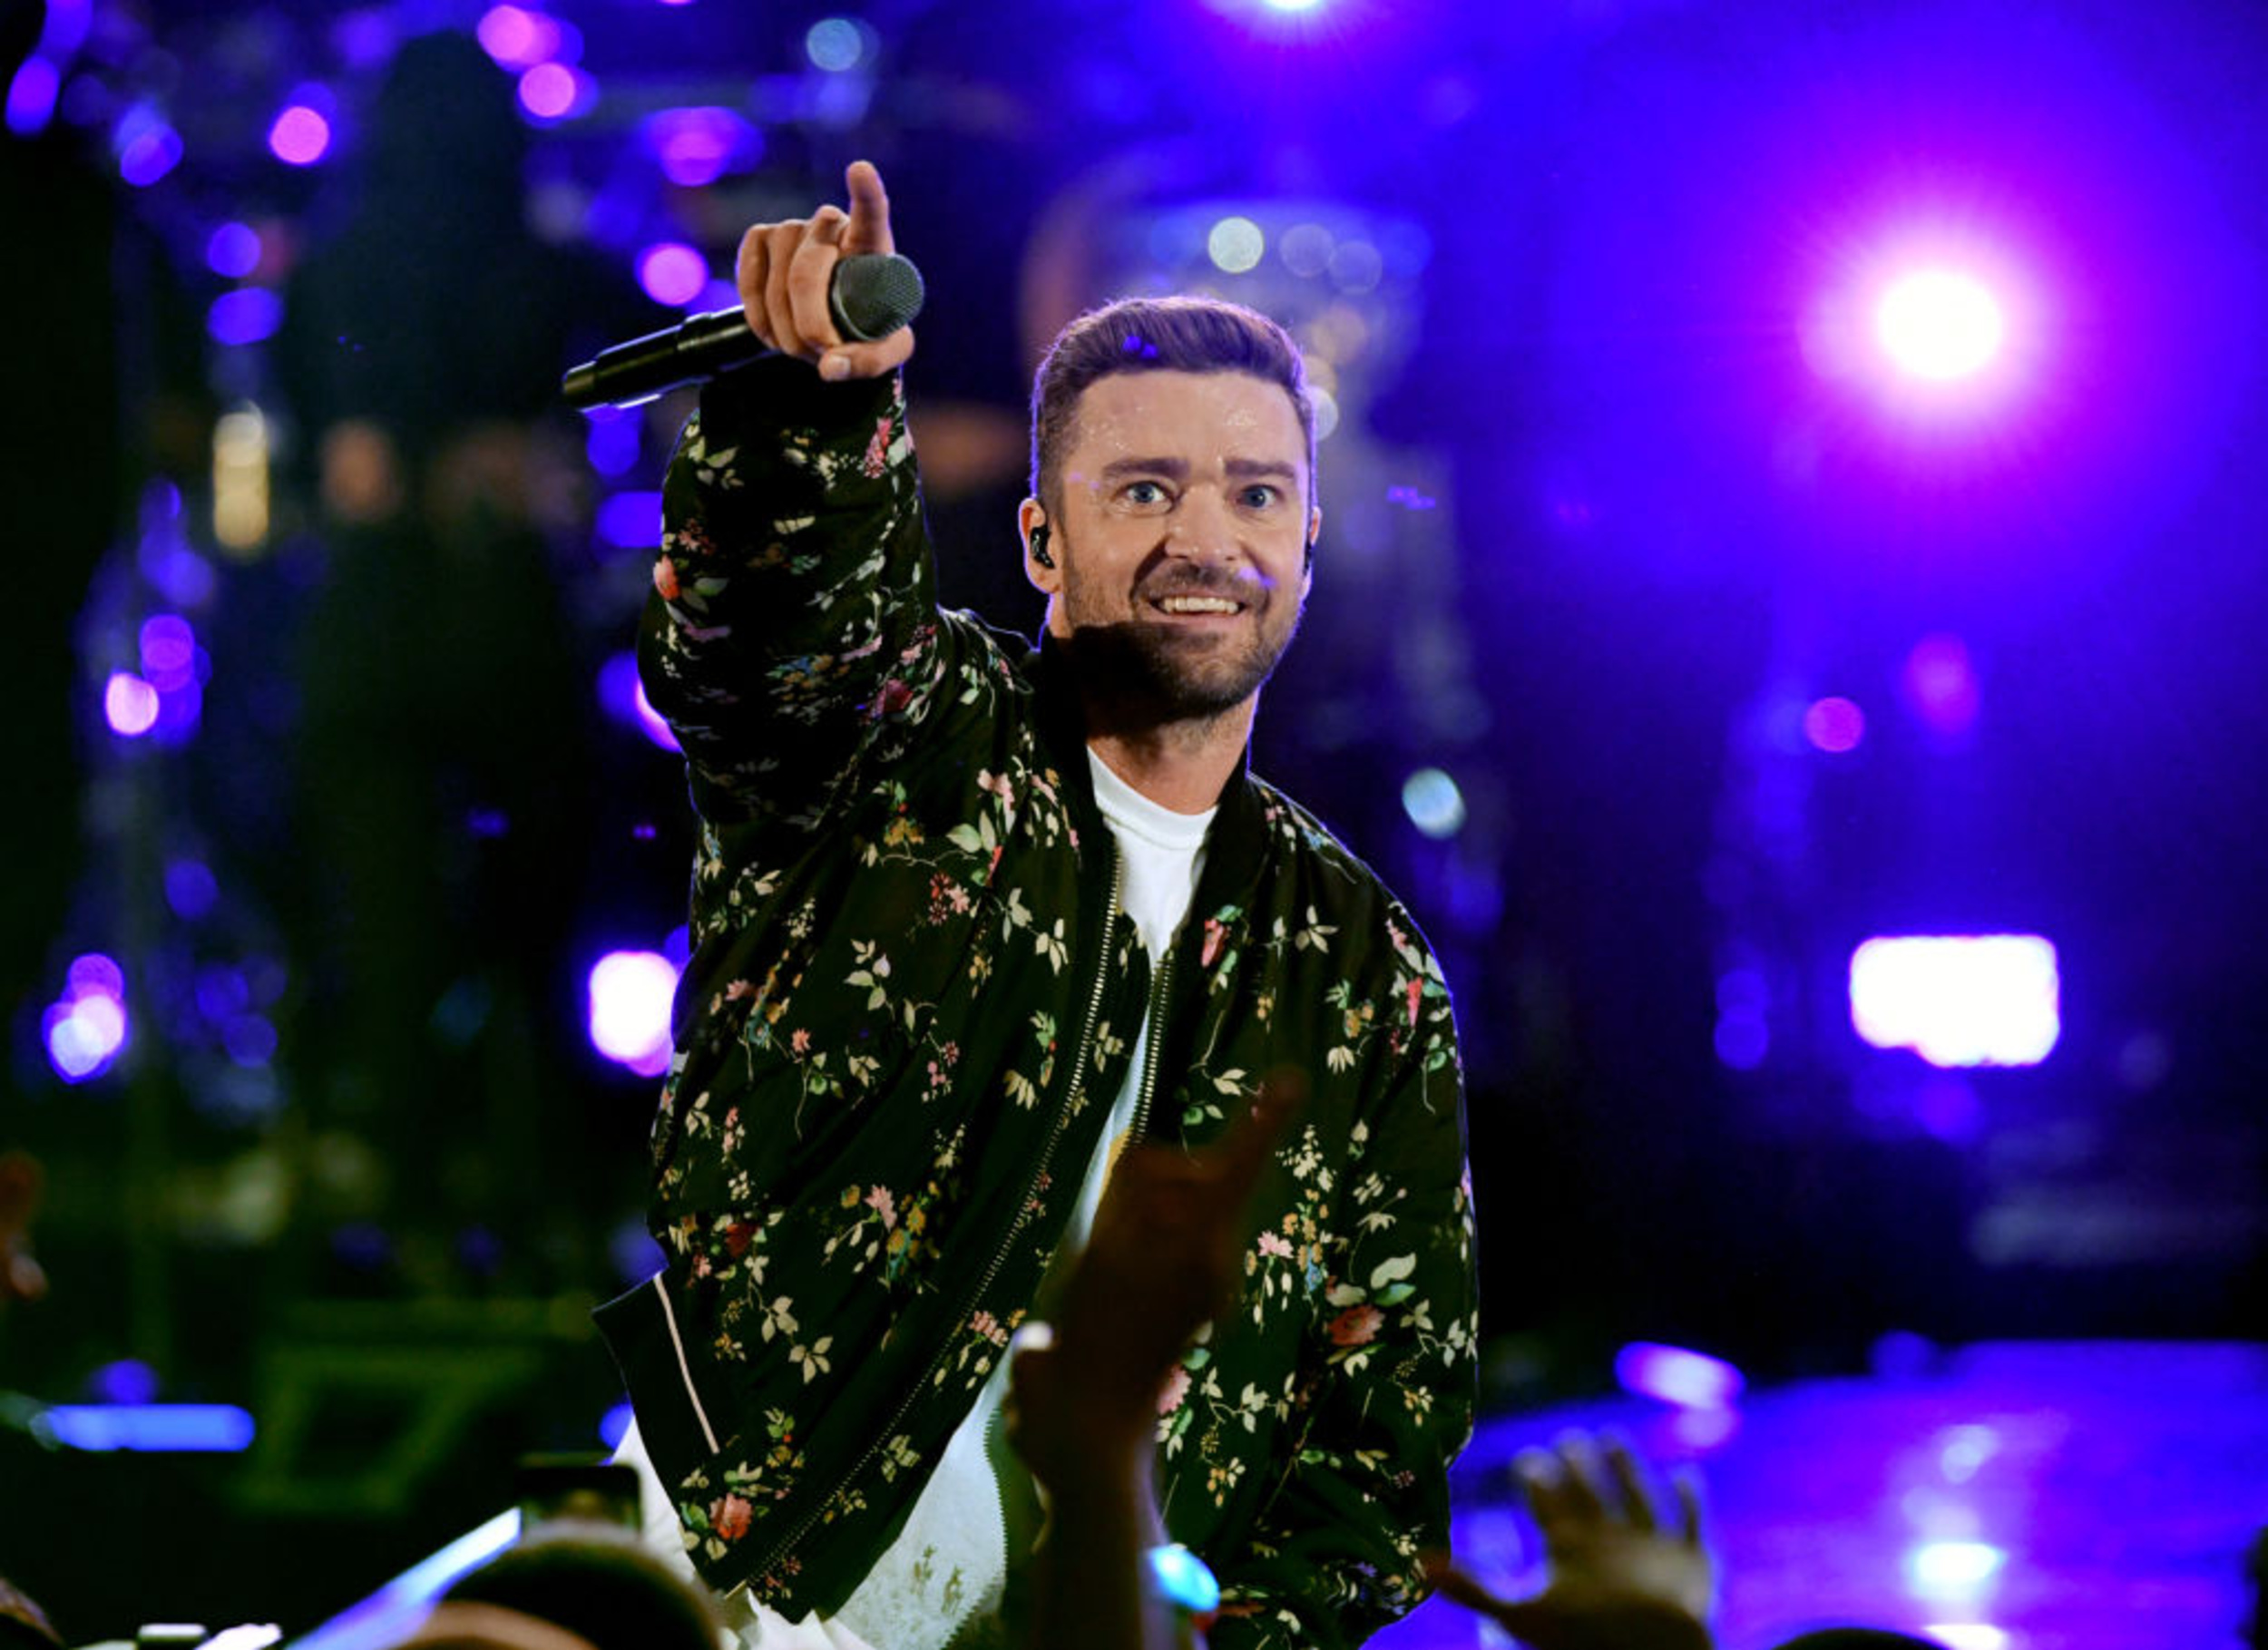 <p>After a six-year hiatus since his previous album <em>Man of the Woods,</em> Justin Timberlake is back with his sixth studio album <em>Everything I Thought I Was. </em>In support of his new album, Timberlake is hitting the road across North America with his "The Forget Tomorrow World Tour." The singer will start his trek on April 29th in Vancouver and end on July 9th in Kentucky. </p><p>You may also like: <a href='https://www.yardbarker.com/entertainment/articles/20_famous_actors_who_struggled_to_find_work_after_making_it_big_032524/s1__40133711'>20 famous actors who struggled to find work after making it big</a></p>